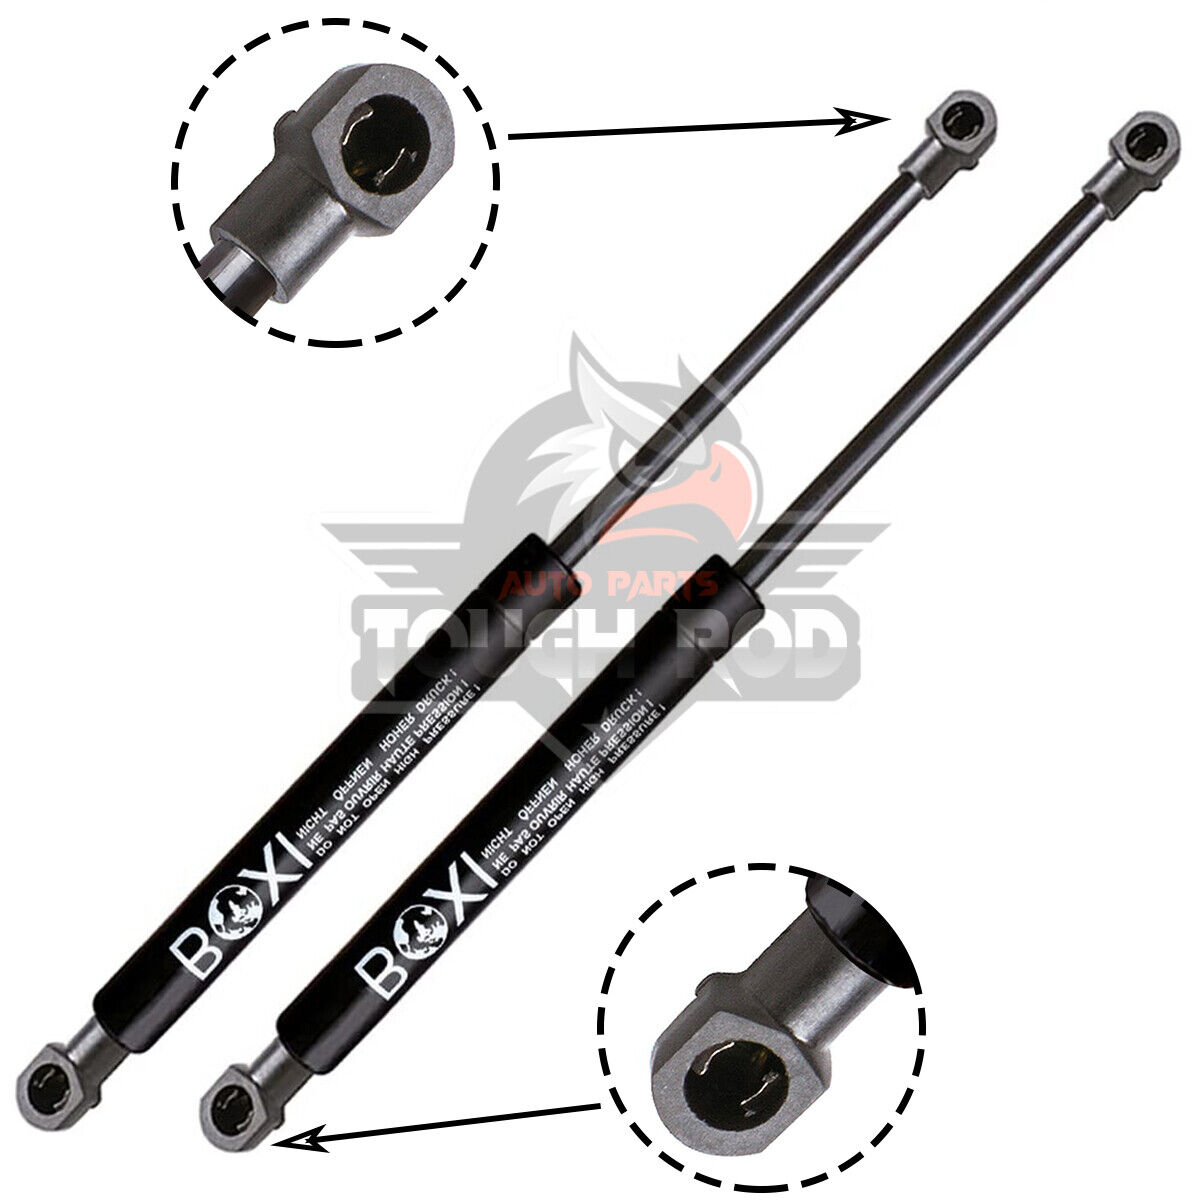 2X Front Trunk Lift Struts Supports Gas Cylinder For Porsche Boxster 1997-2005